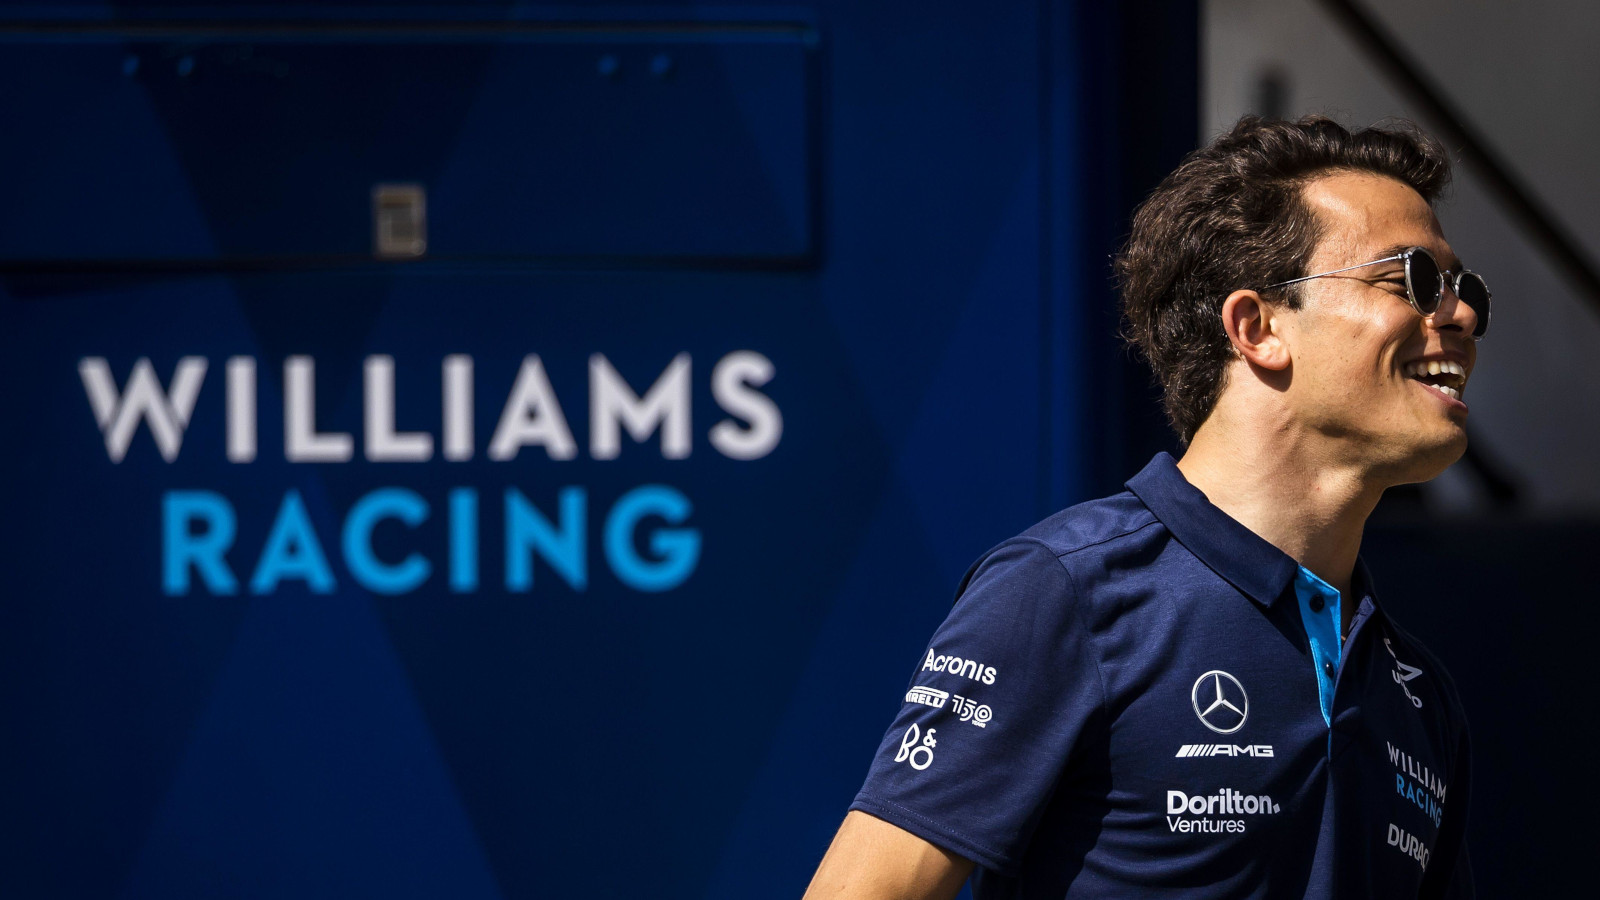 Nyck de Vries smiling with the Williams signage behind him. Spain May 2022